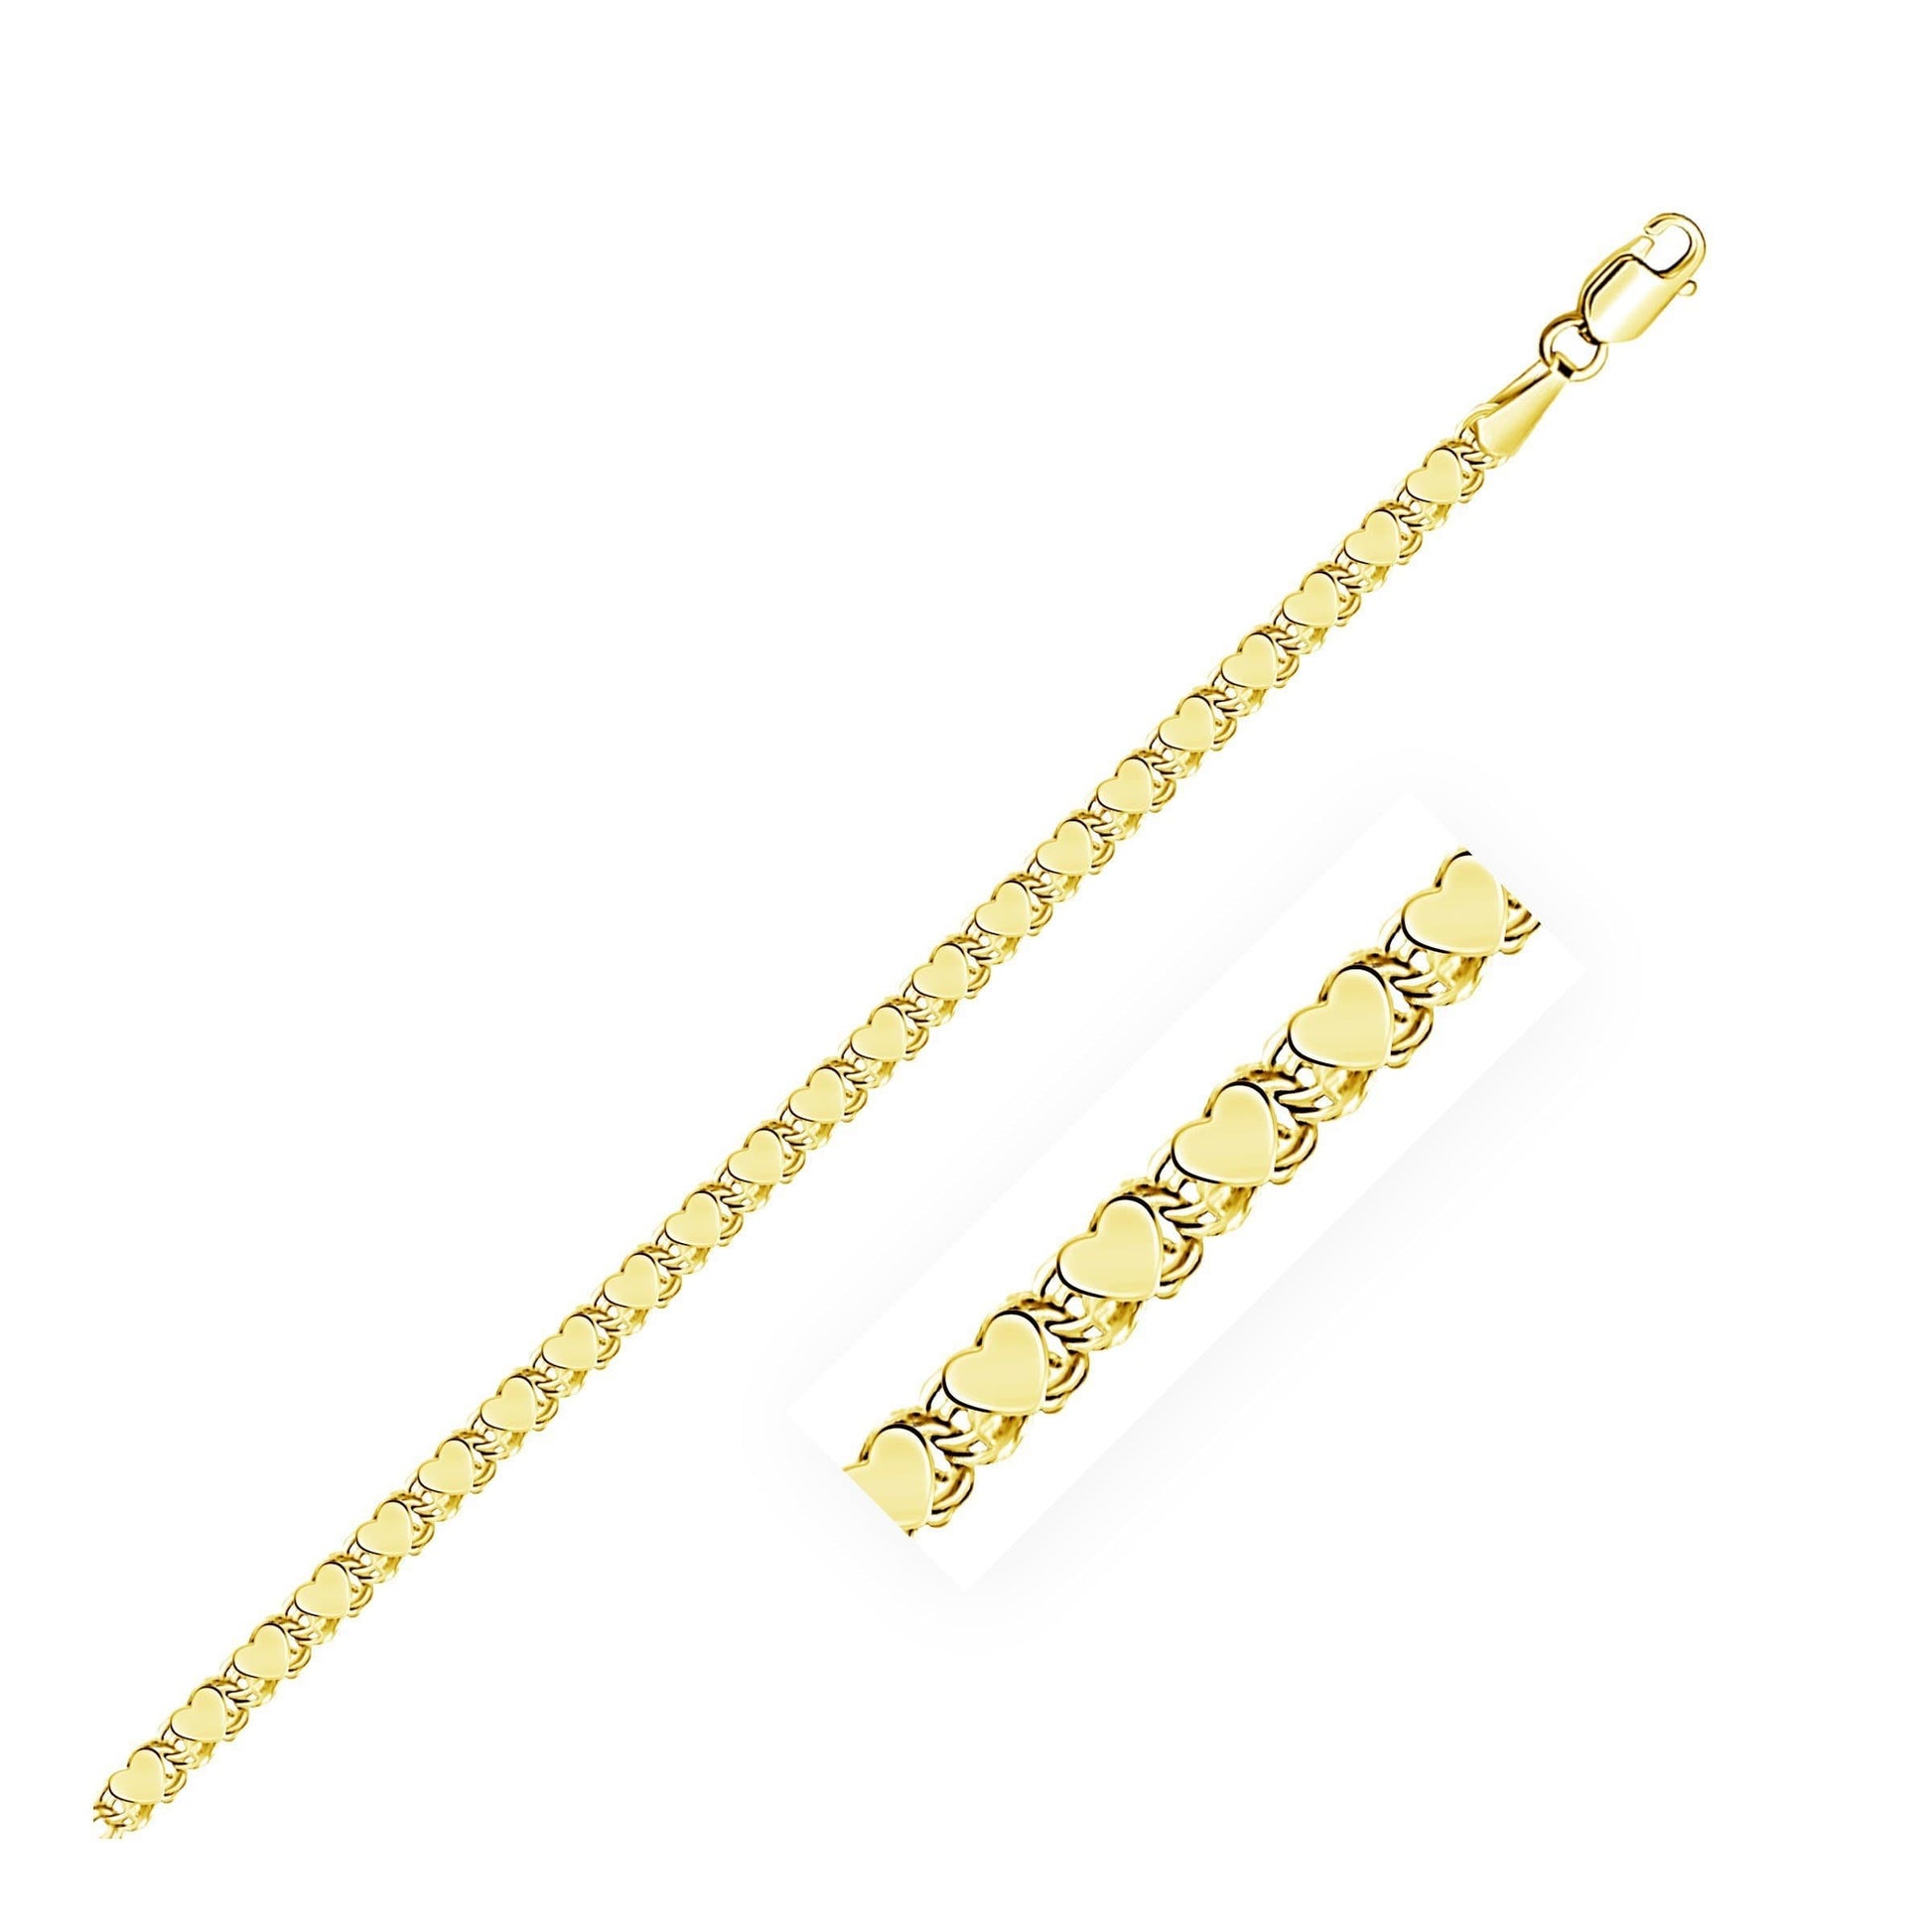 3.0mm 10k Yellow Gold Heart Anklet